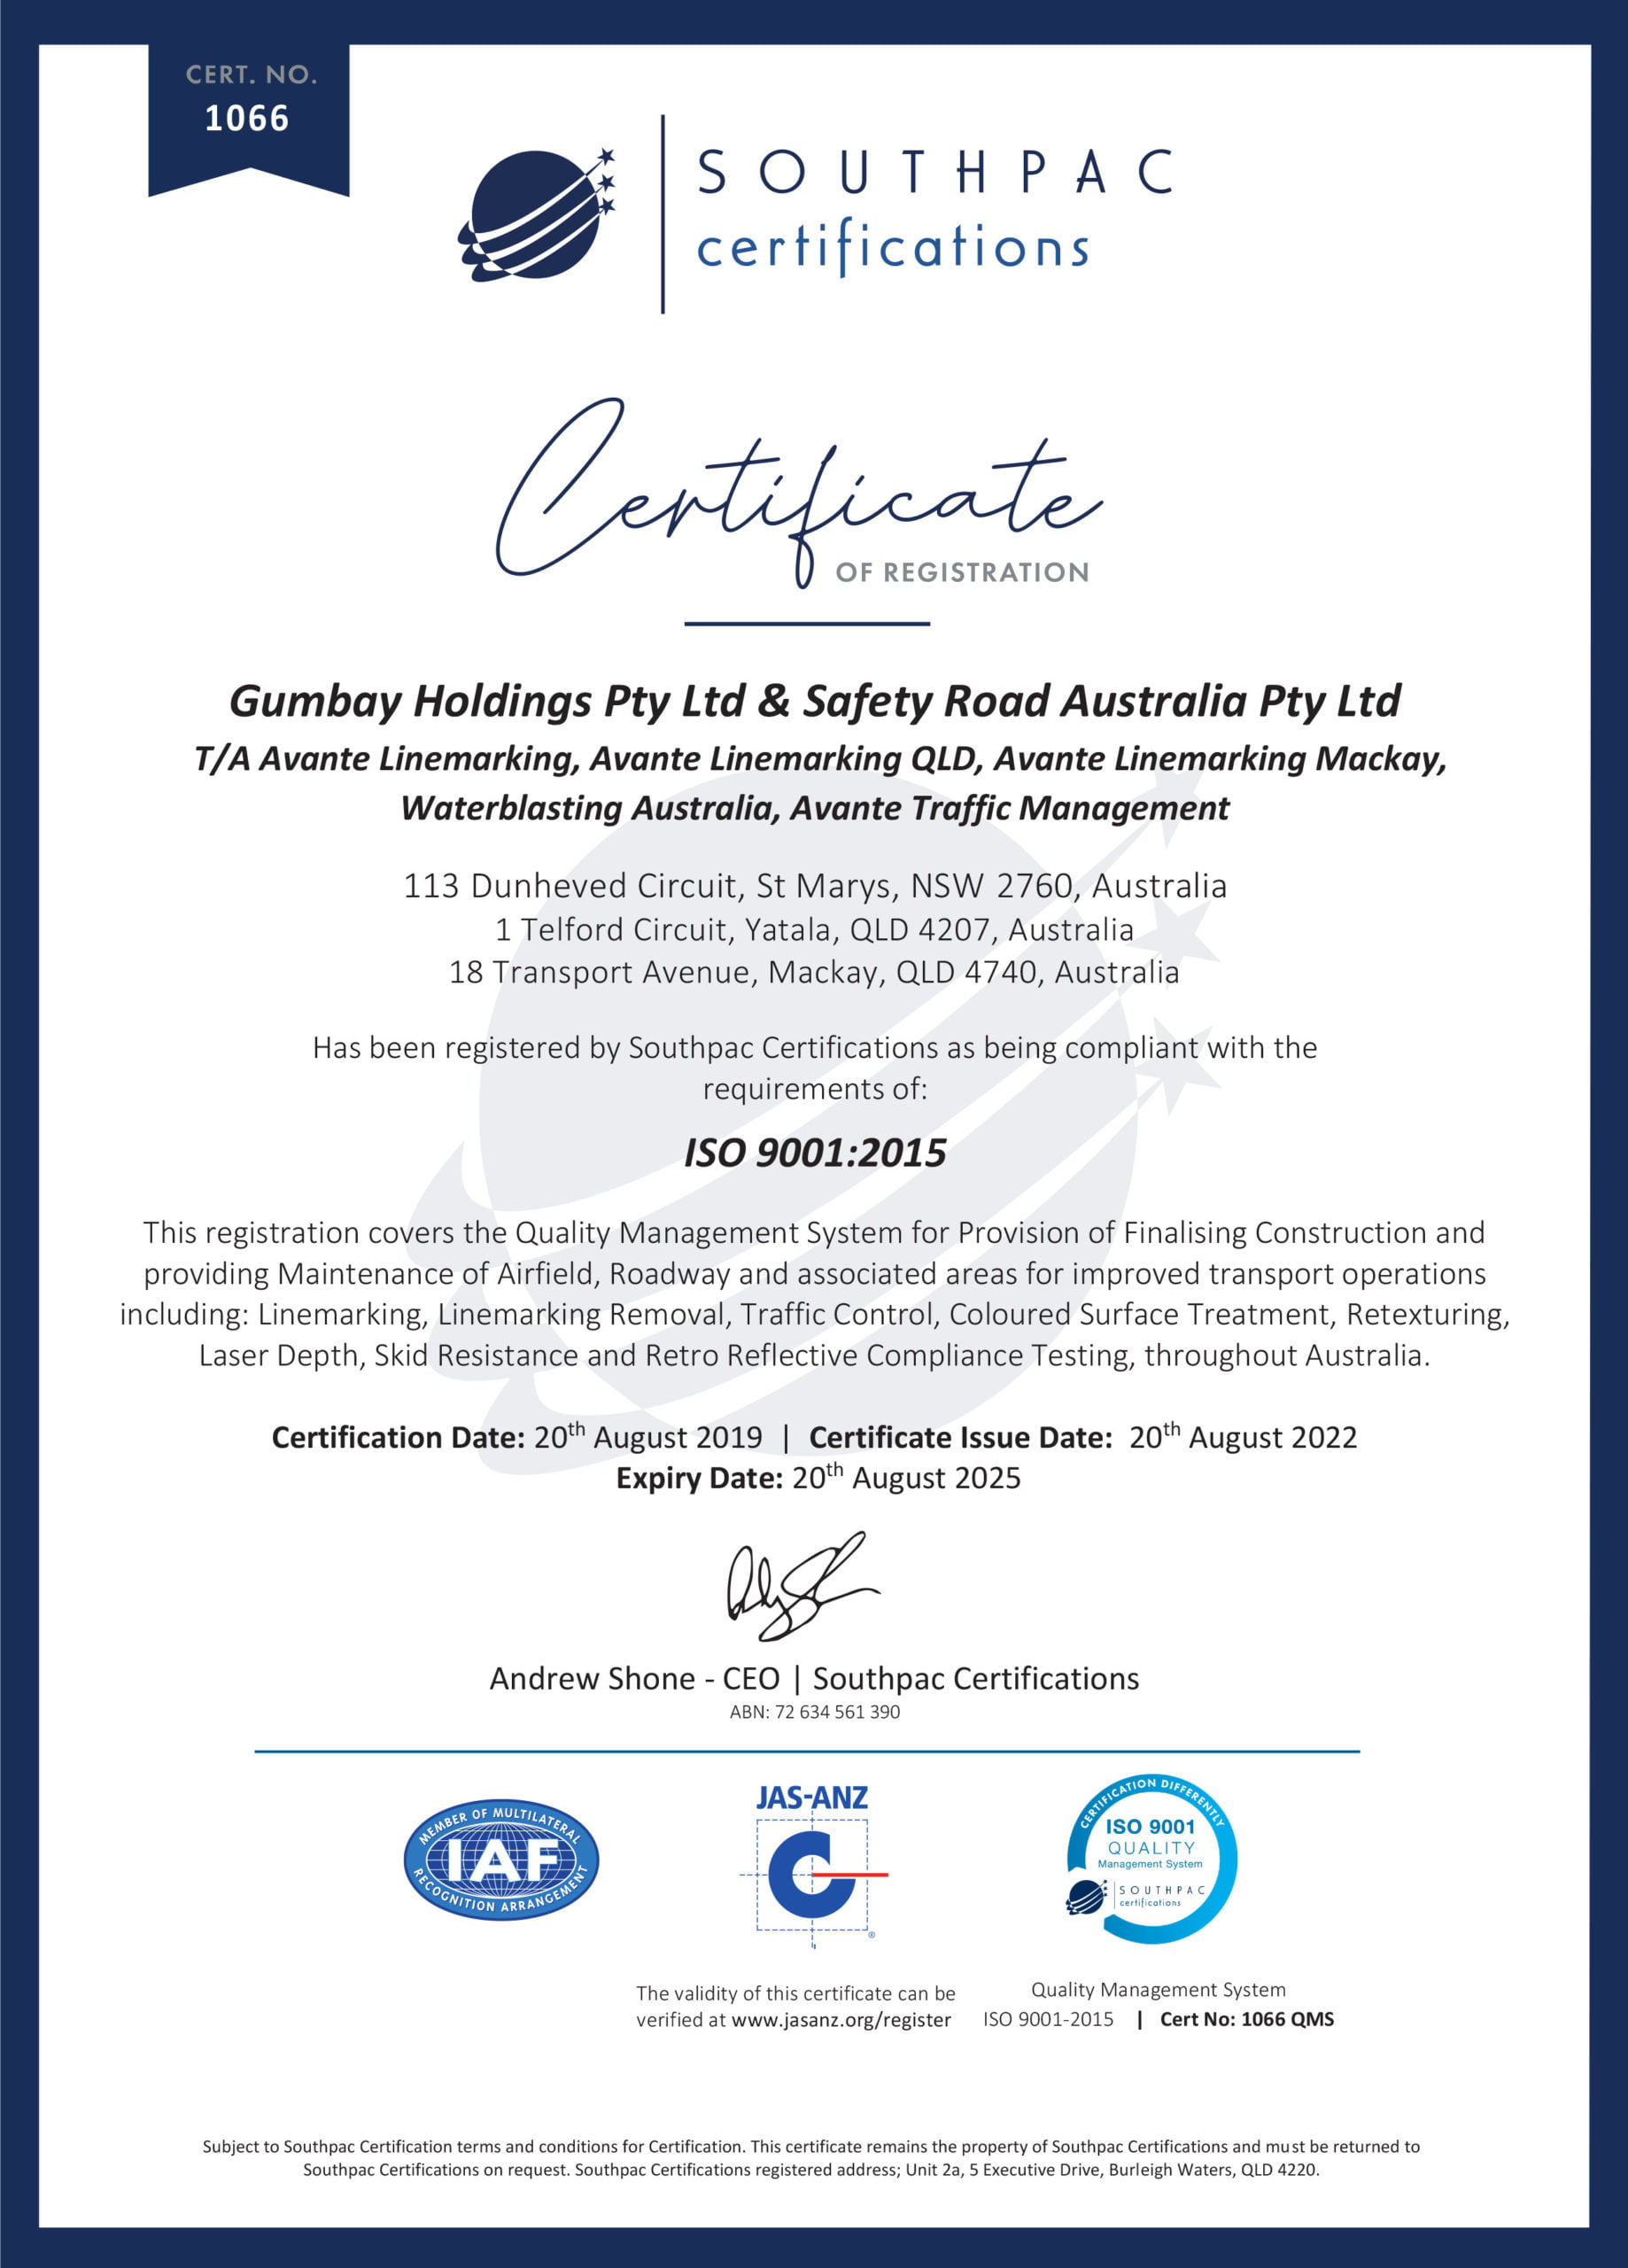 QMS-ISO-9001-Certificate-2022